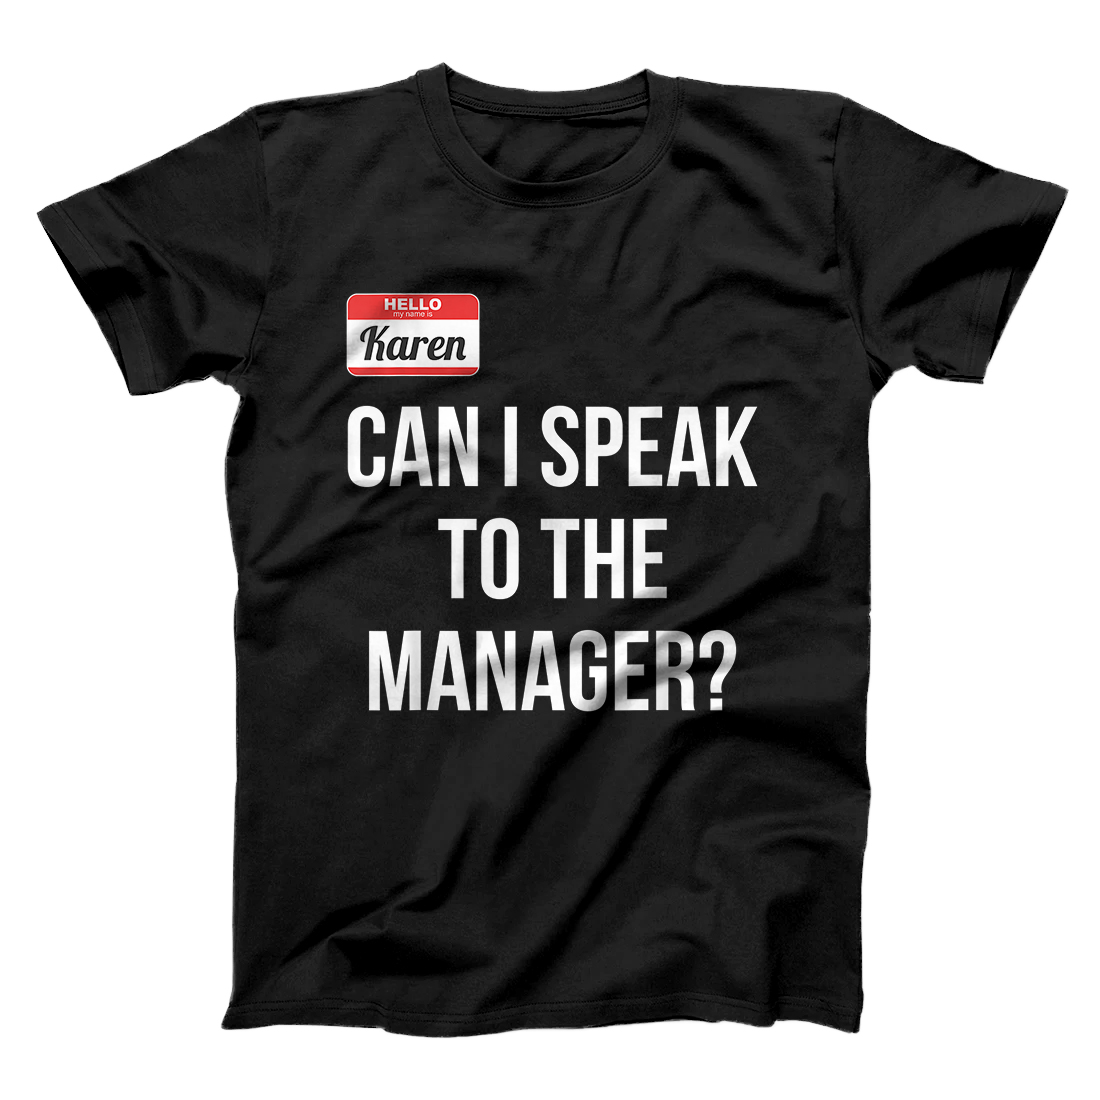 Personalized Funny Karen Shirts - Can I Speak To The Manager T-Shirt